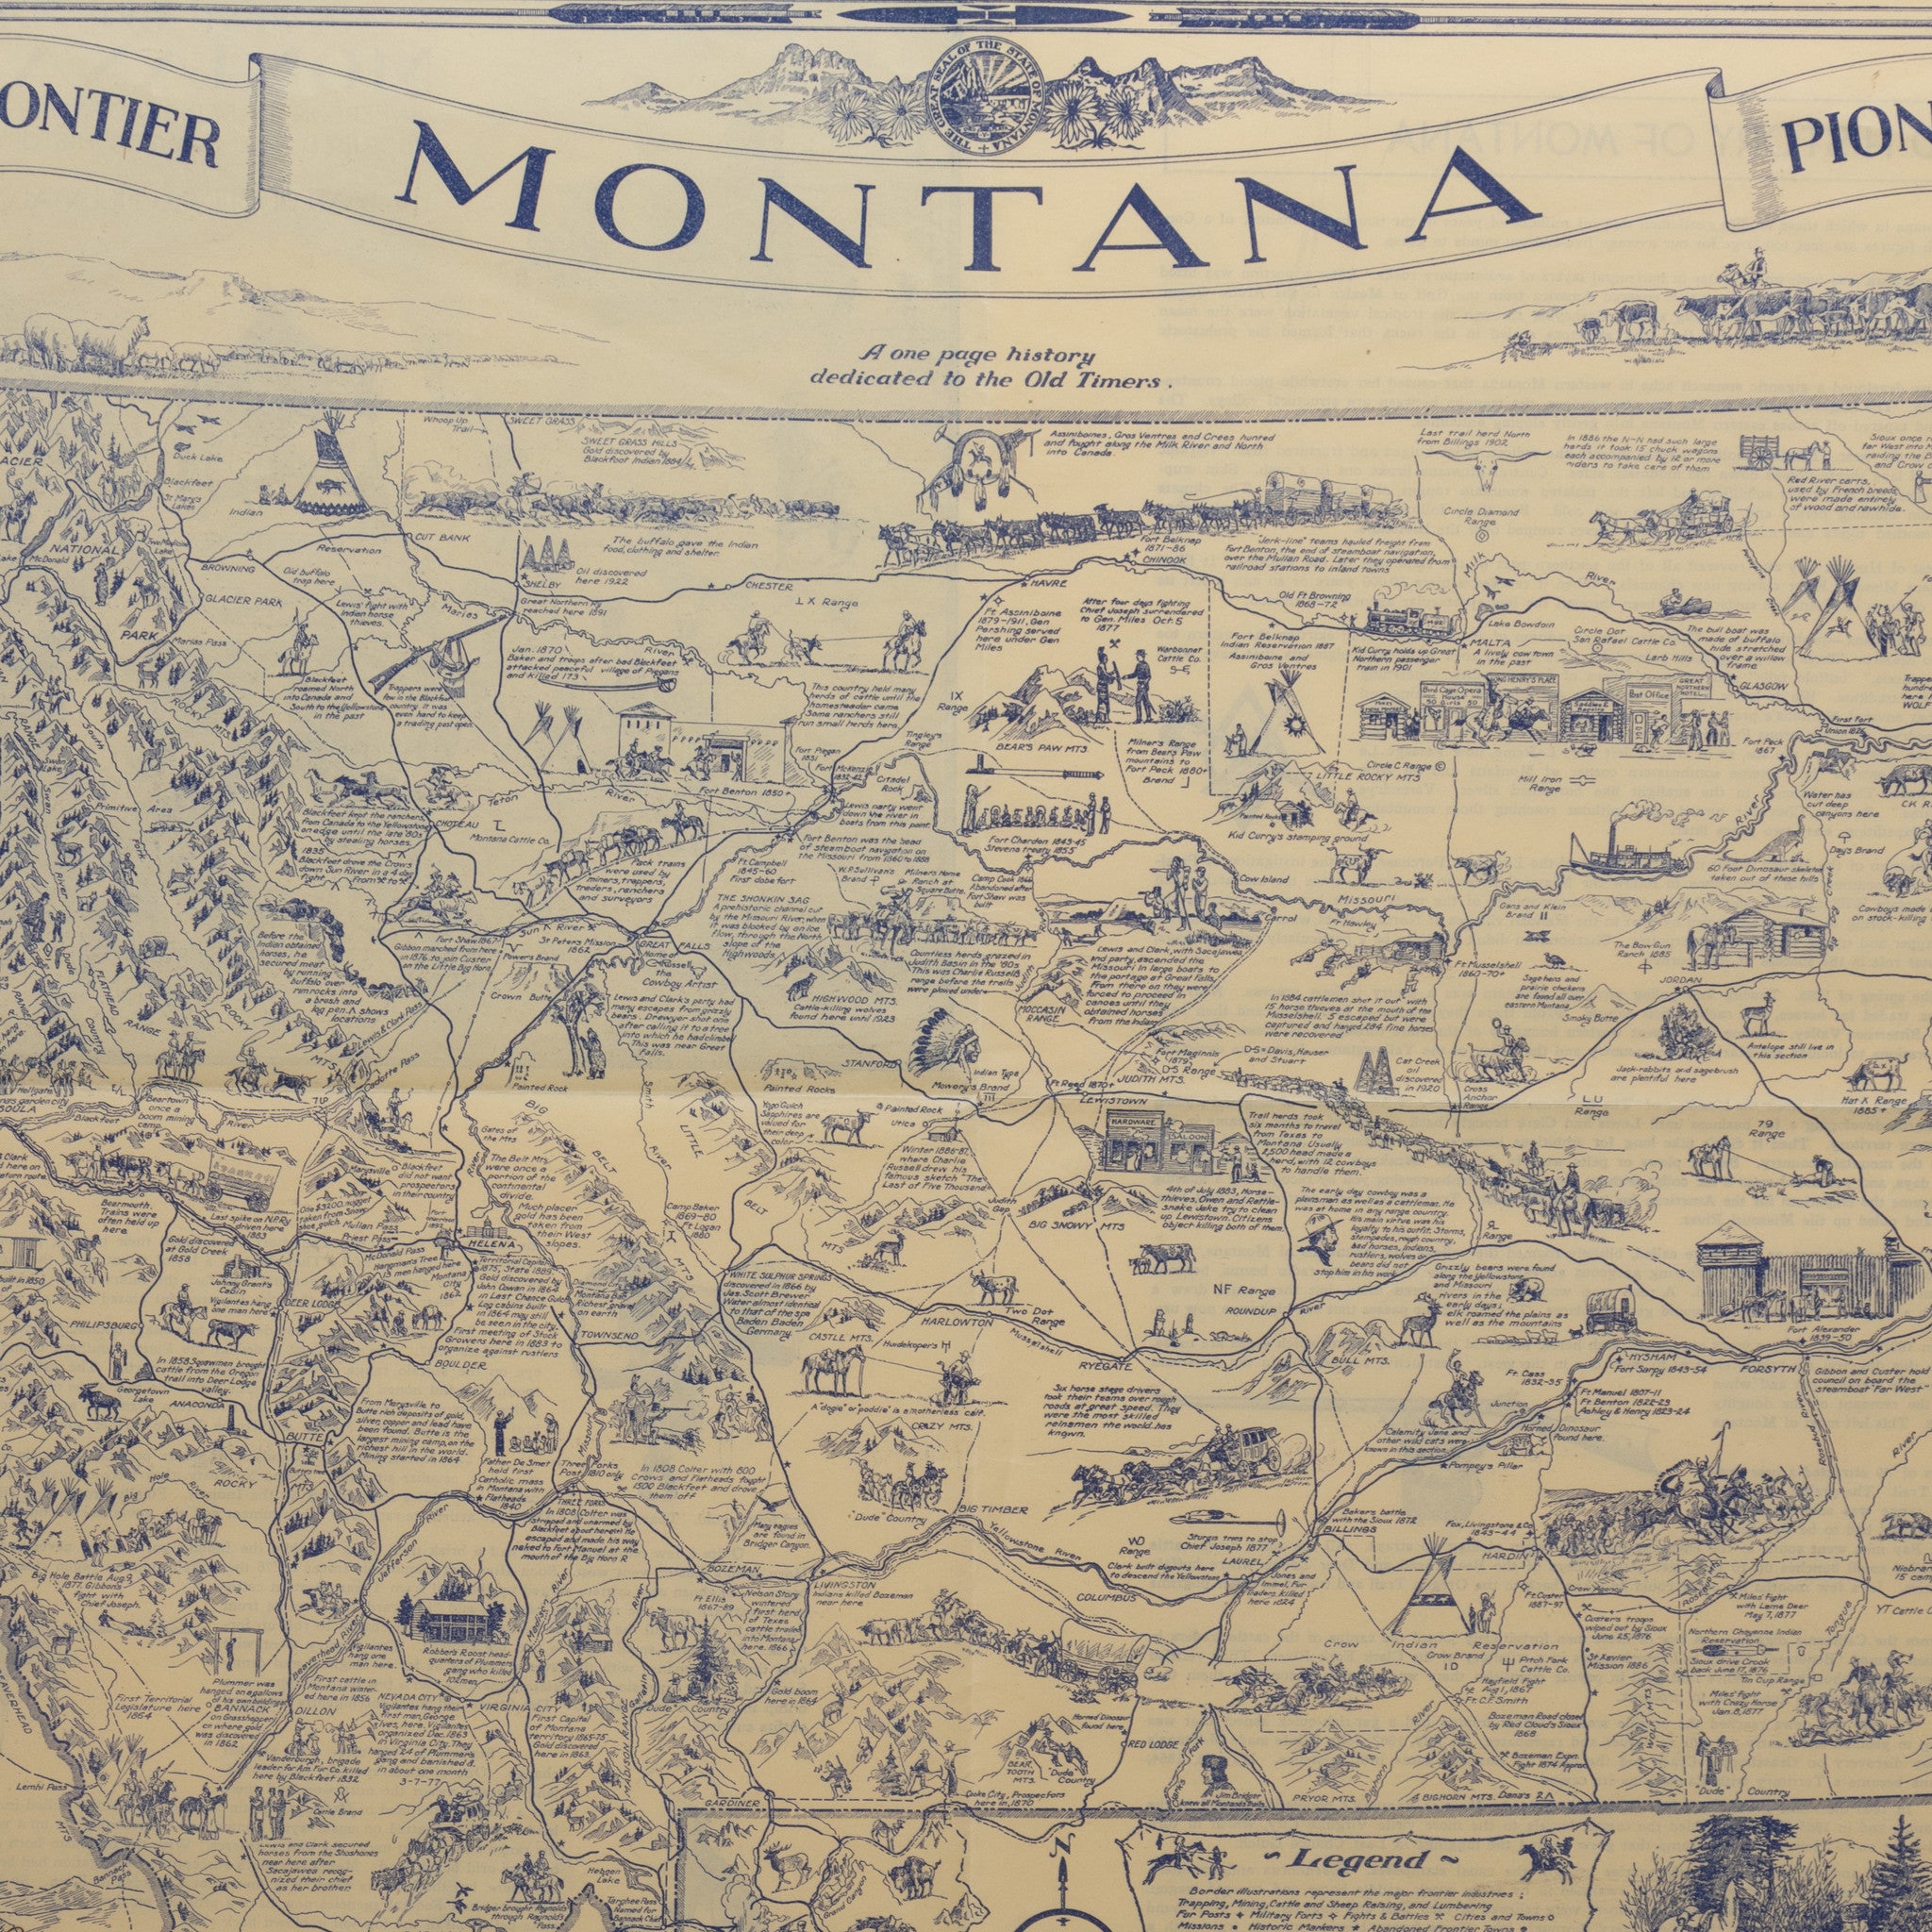 Map of Montana; Irvin "Shorty" Shope 1937